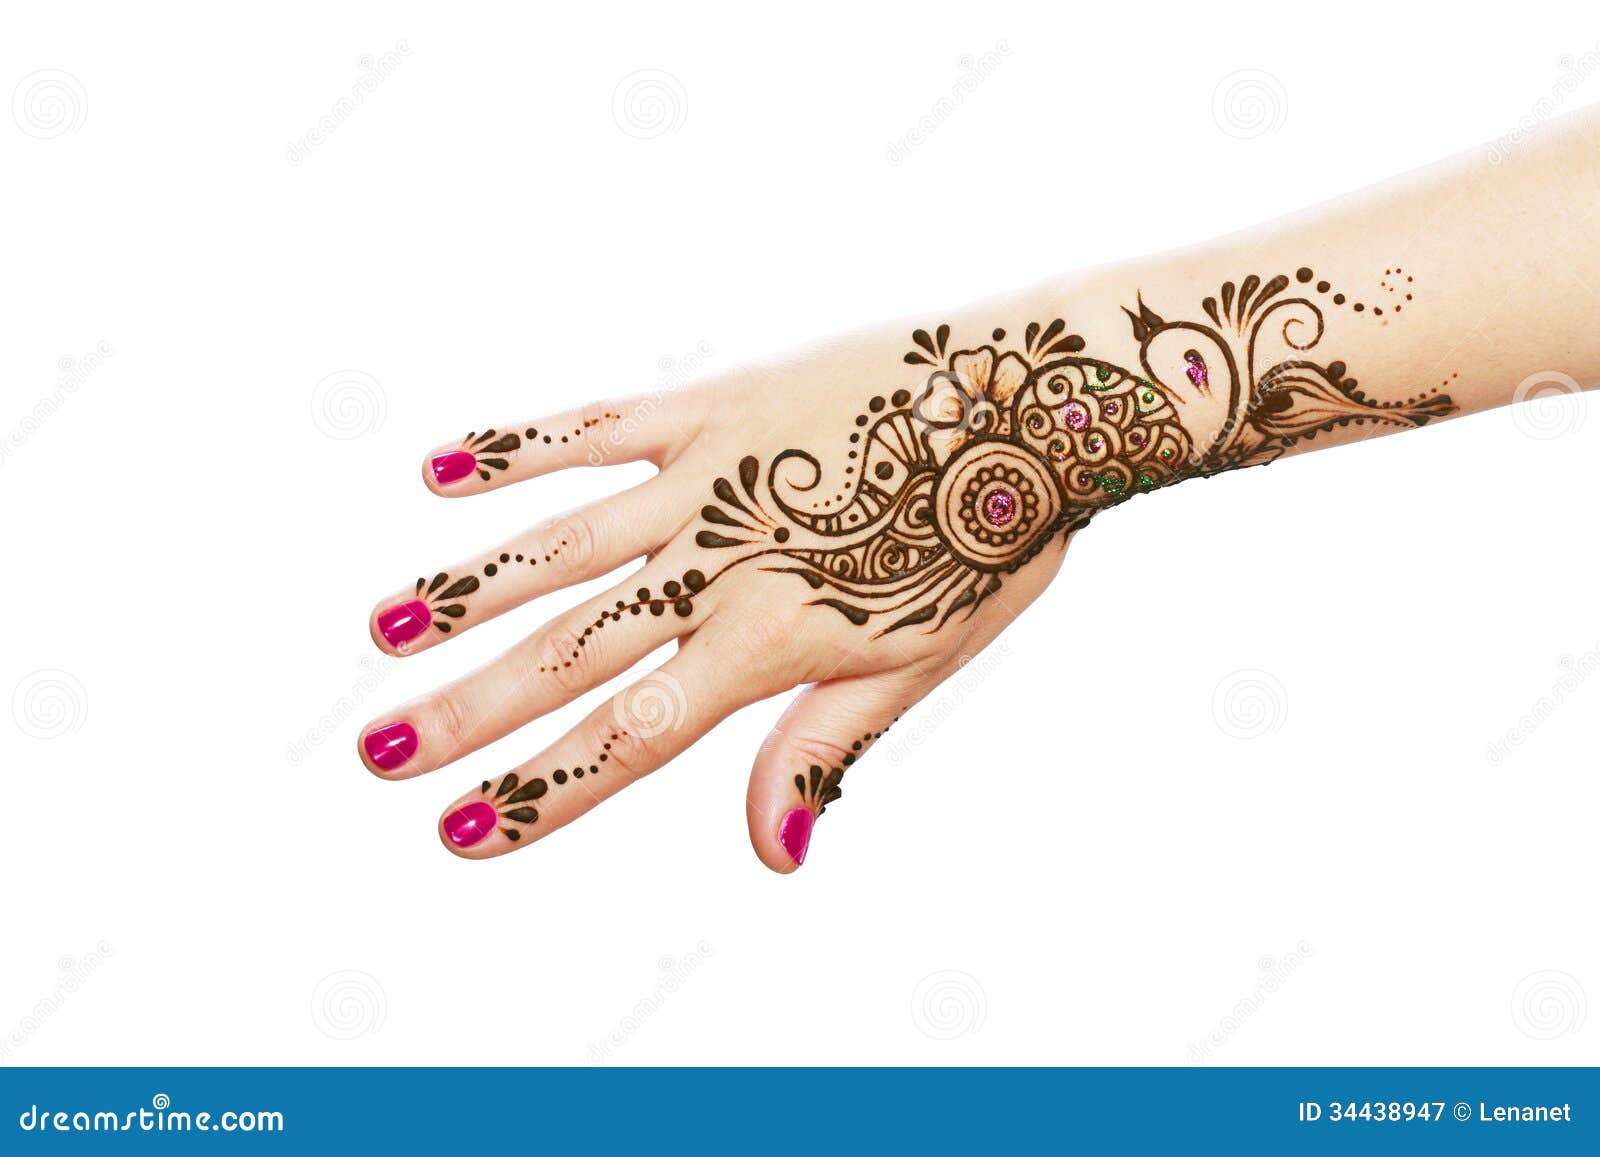 Henna being applied stock image. Image of flowers, bodyart - 34438947